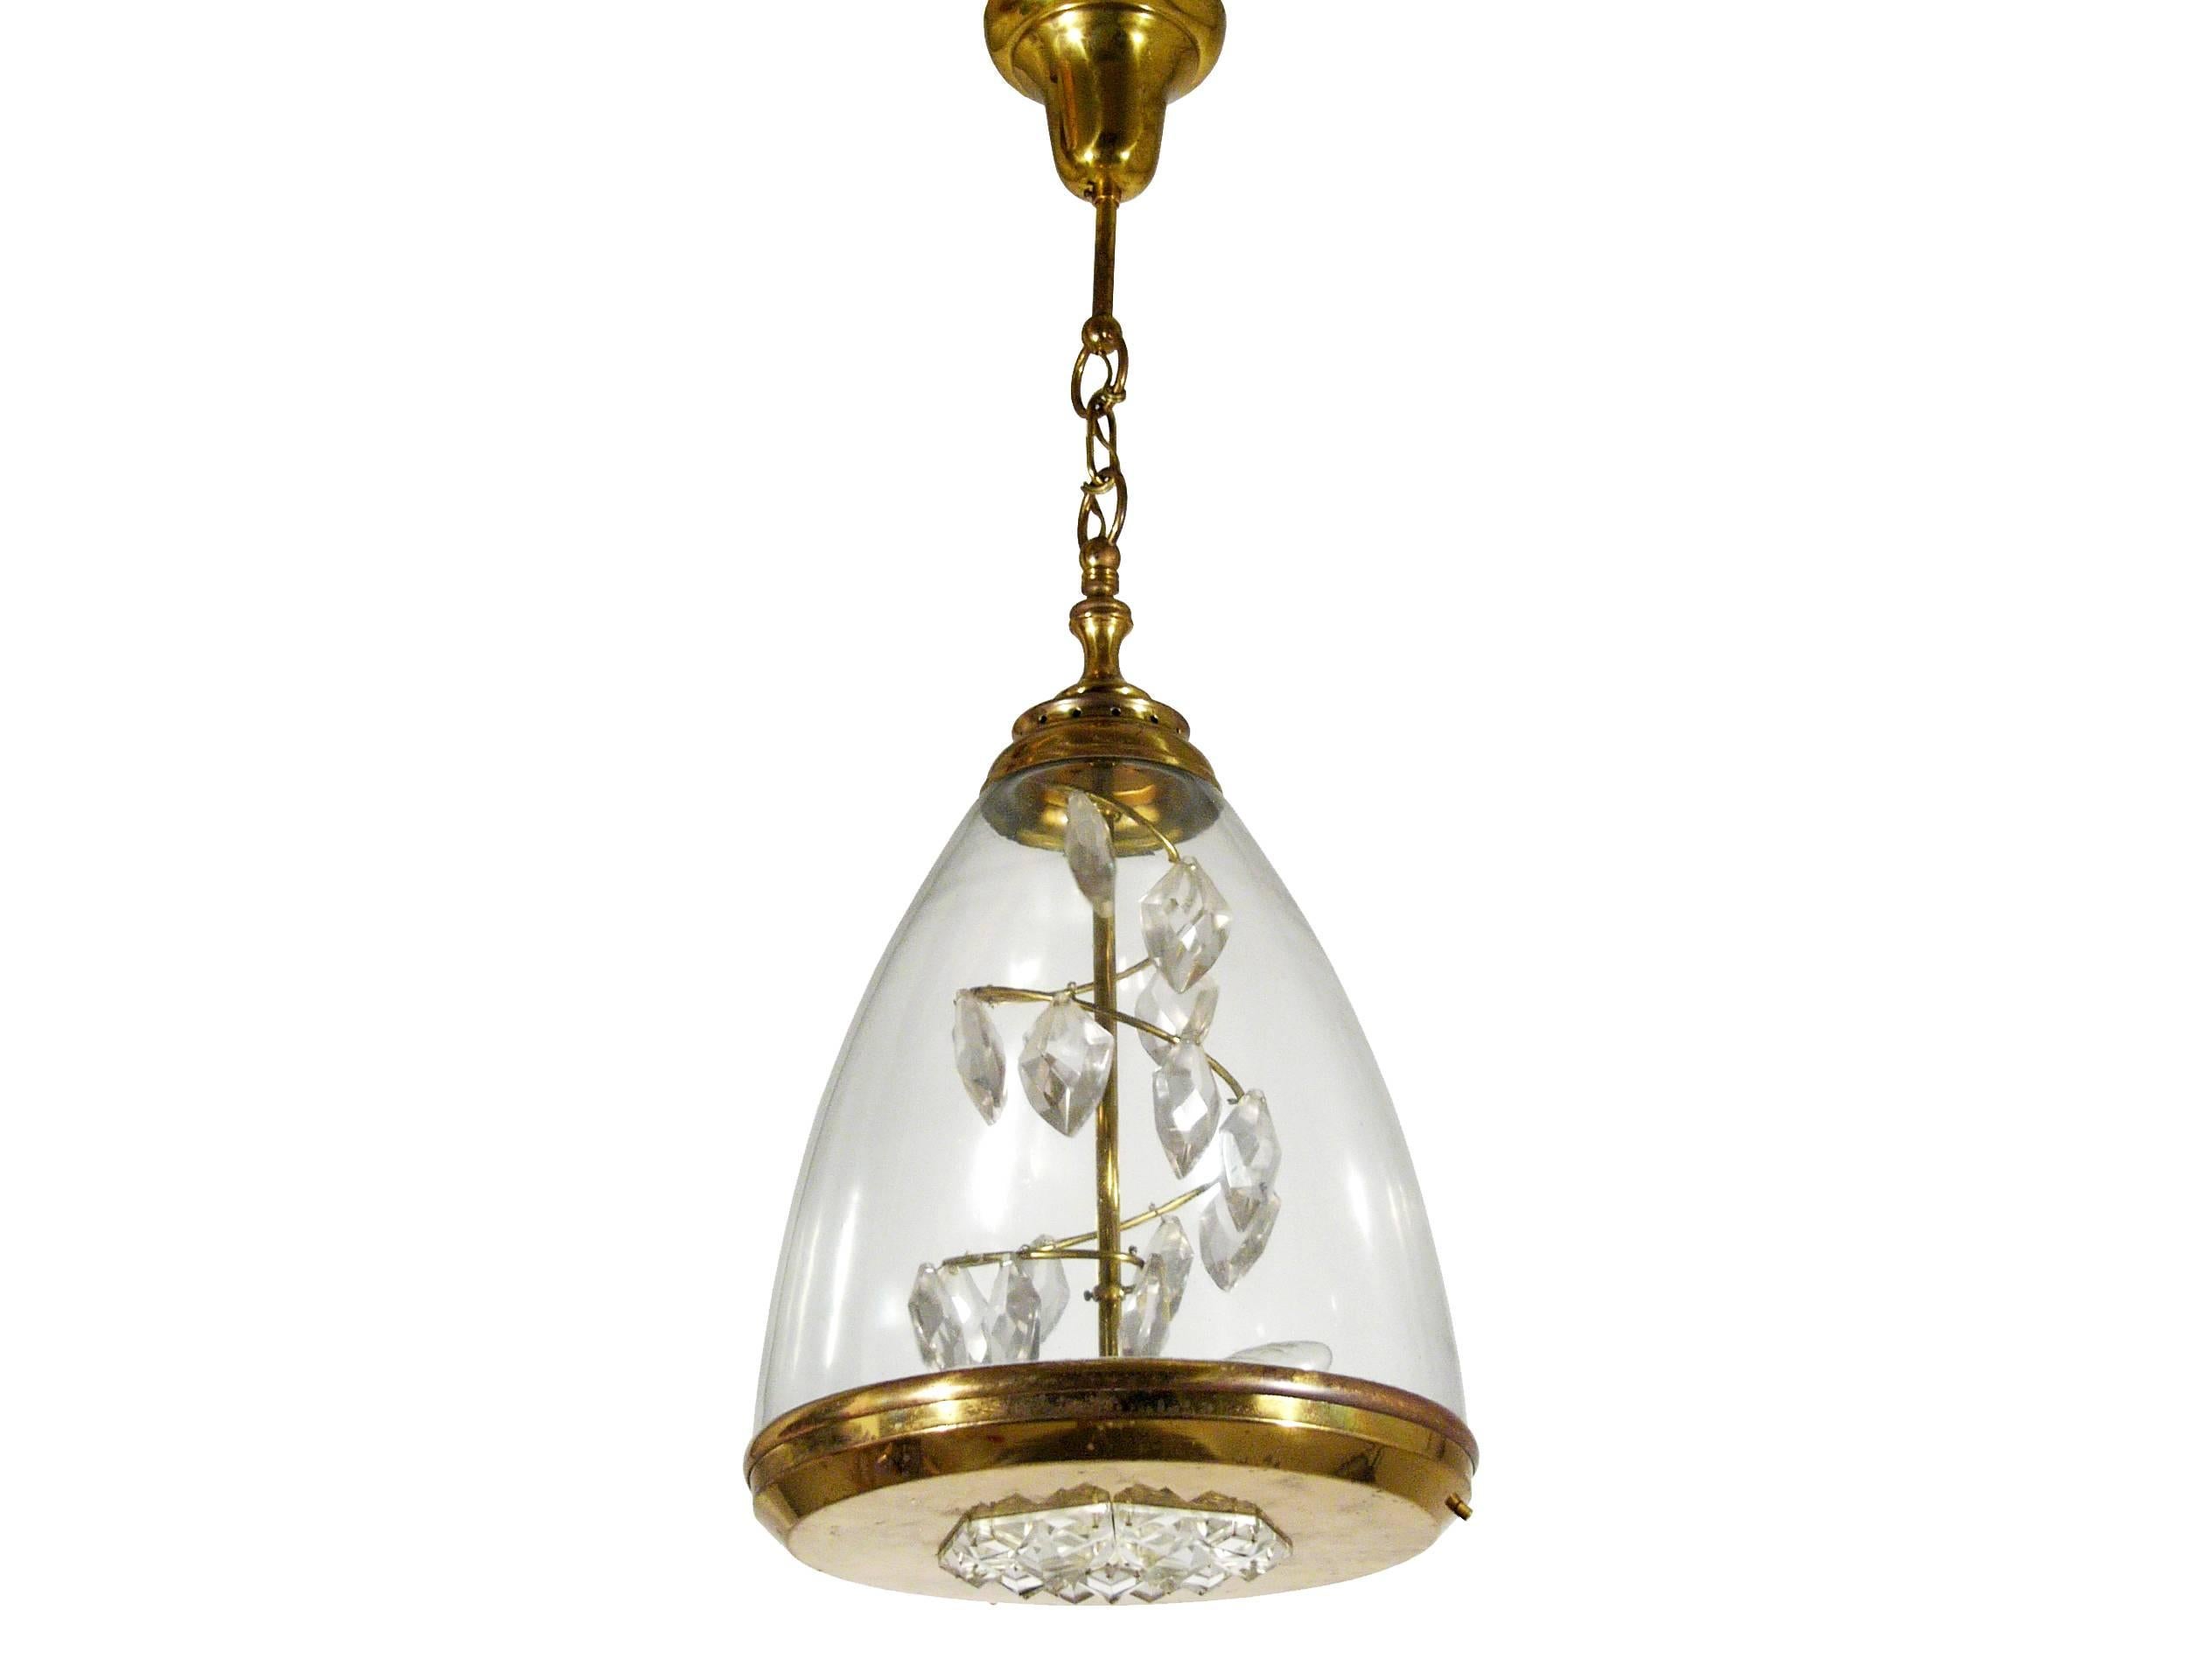 This pendant light was designed in Italy, circa 1950s. Its style resembles the contemporary Azucena production. It is made from brass, mouth blown glass and a decorative spiral of crystal prisms. It remains in excellent vintage condition: Oxidation